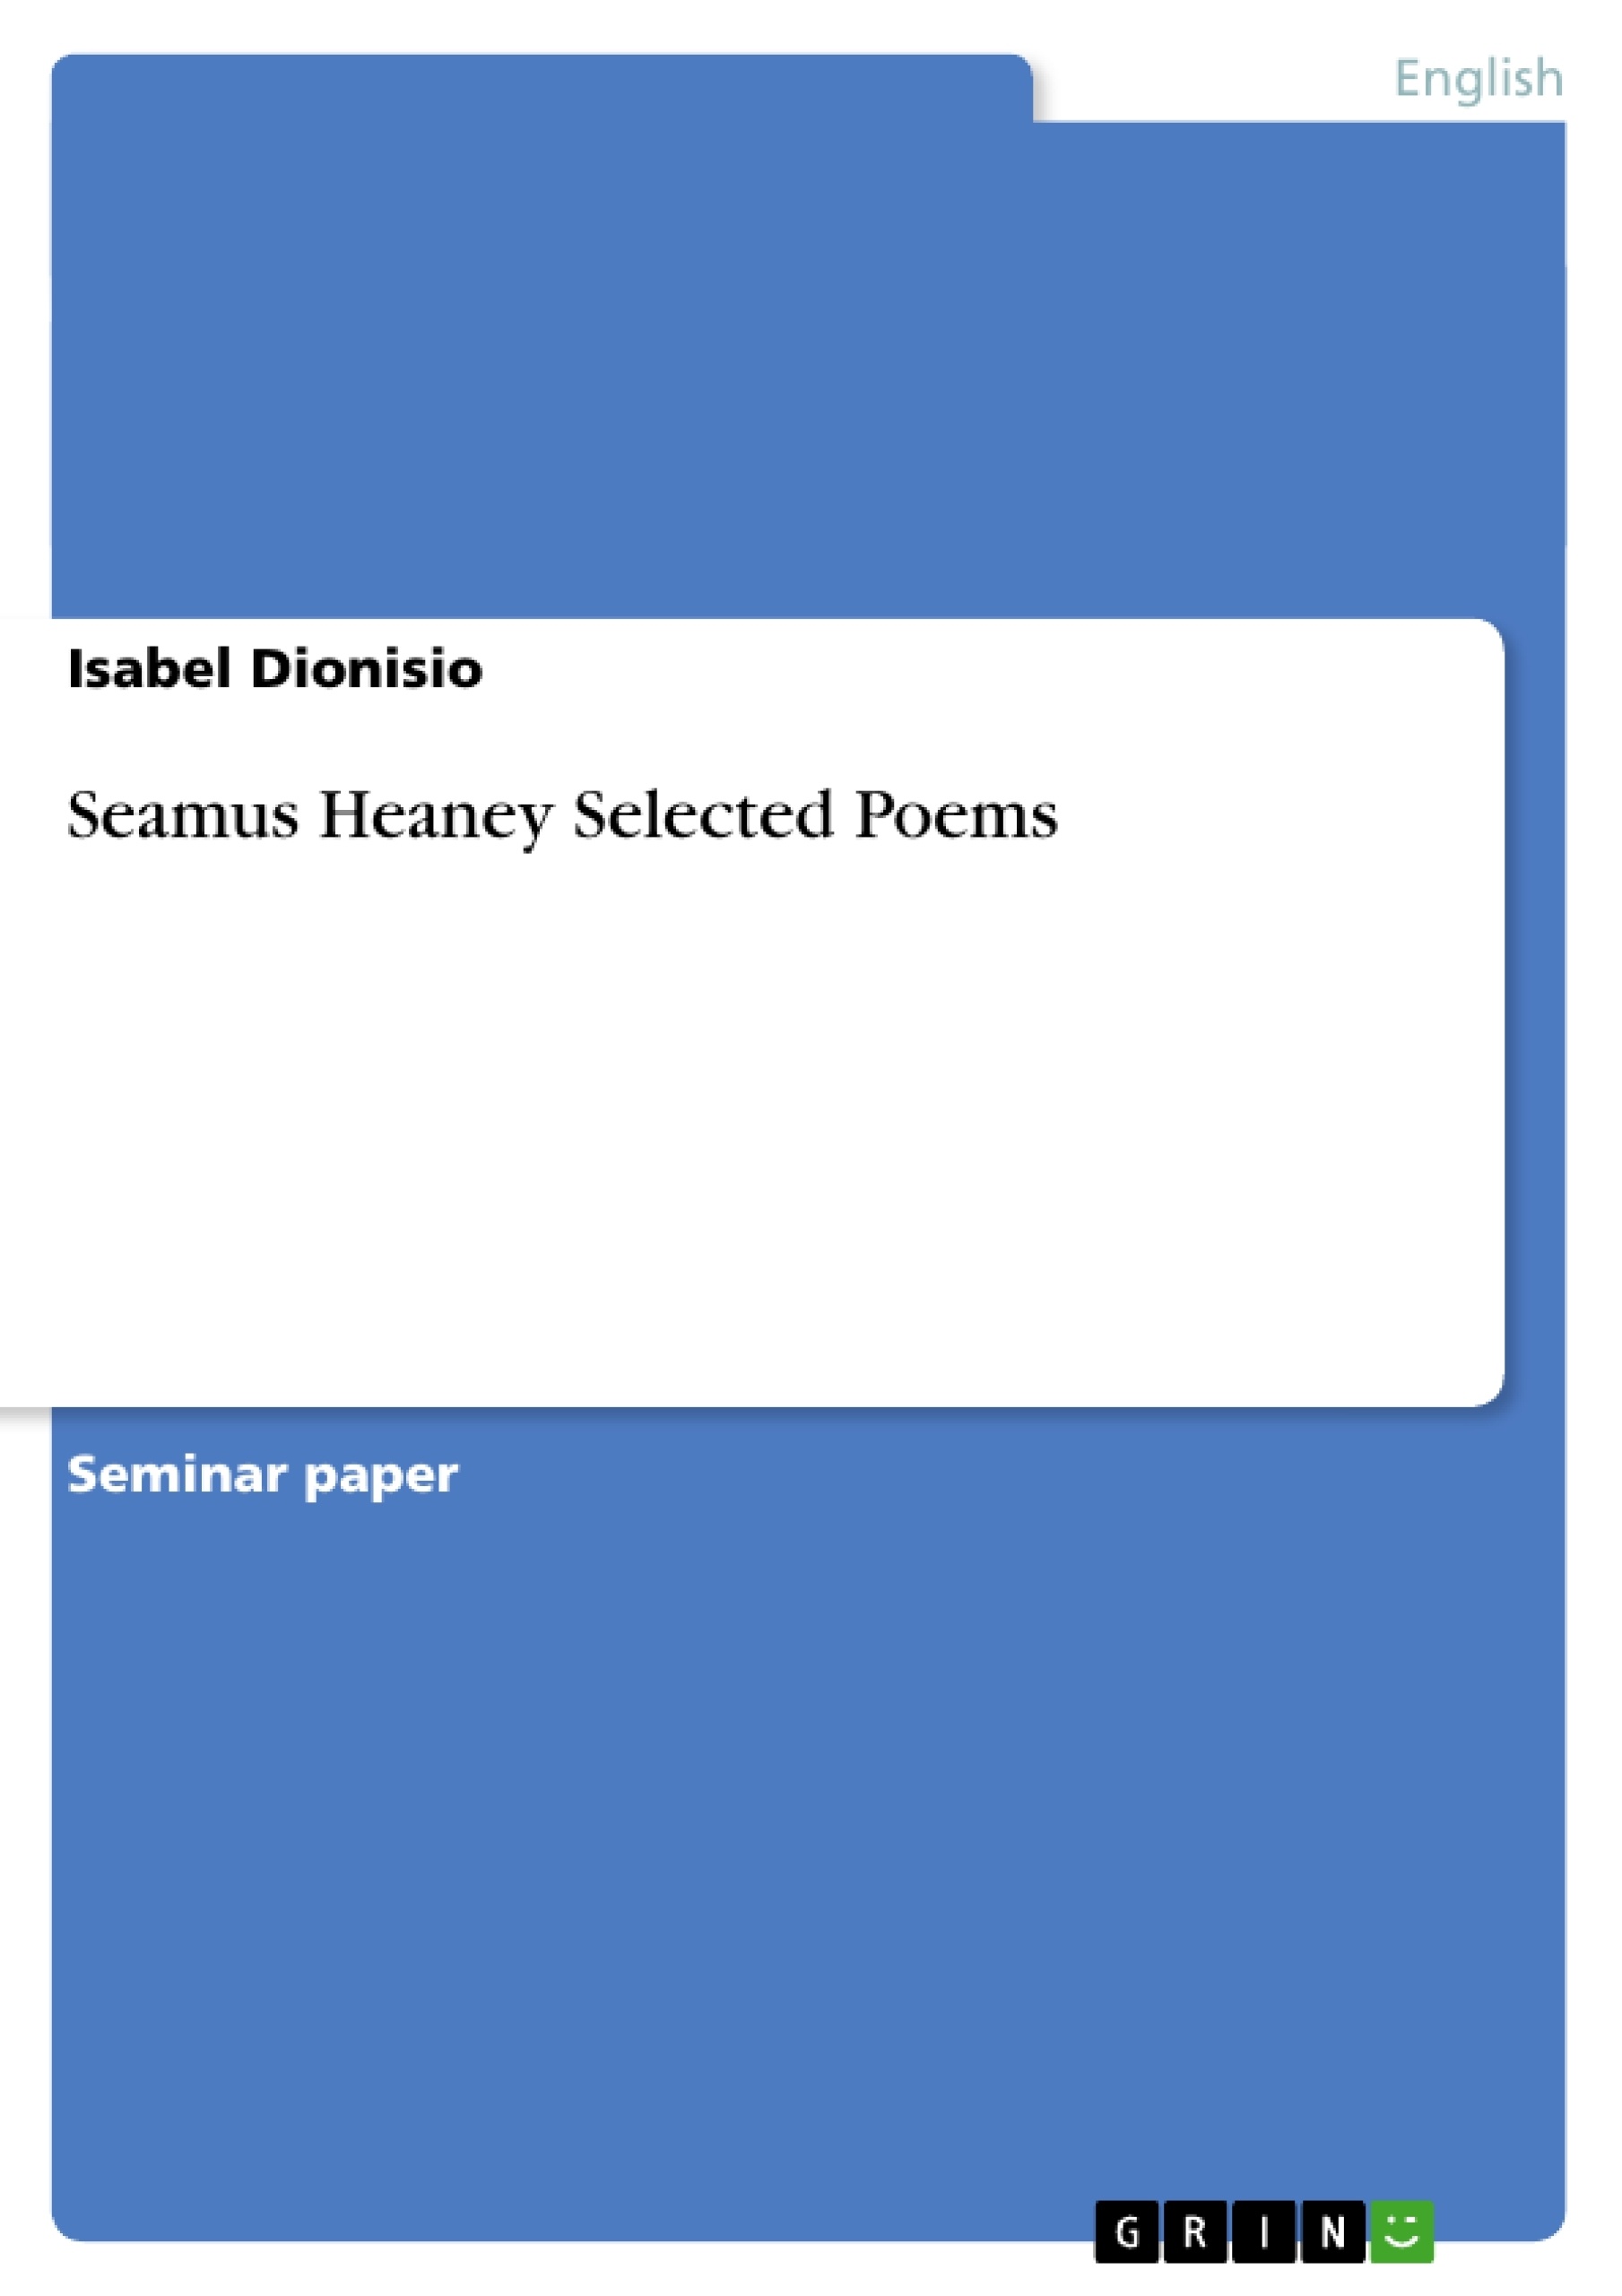 Seamus Heaney Selected Poems - GRIN